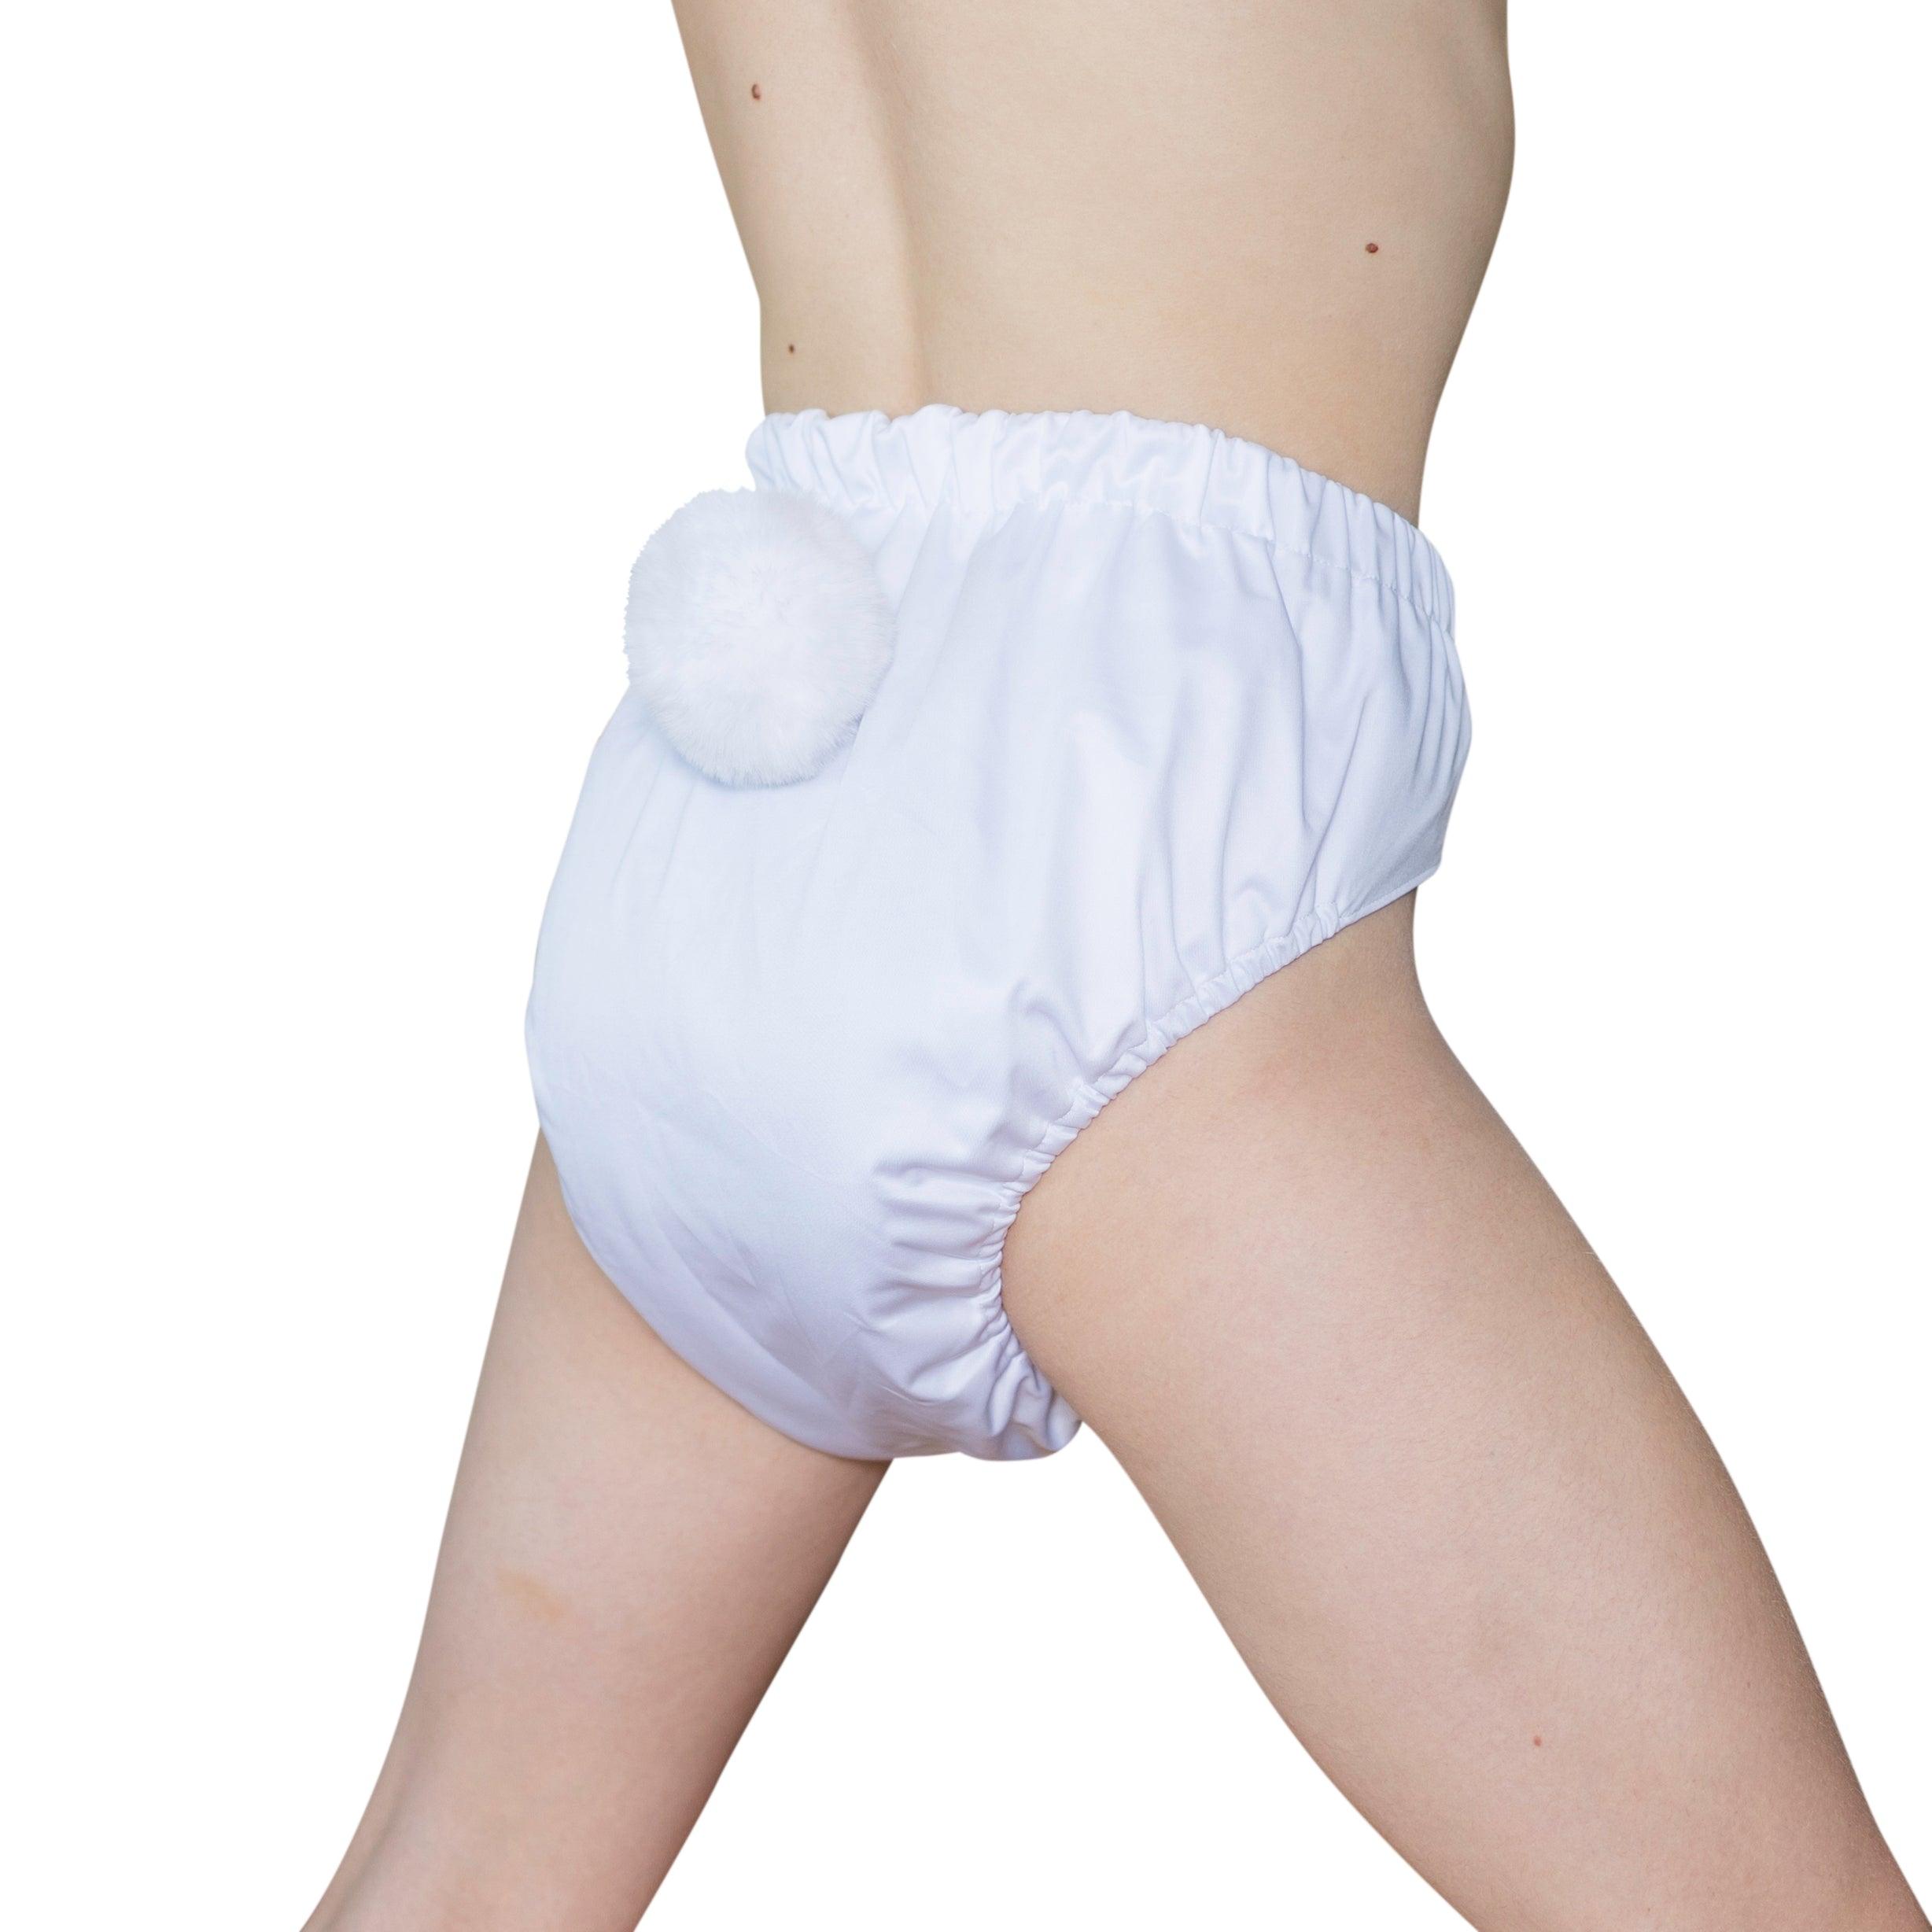 carolina chiriboga recommends adults wearing cloth diapers pic